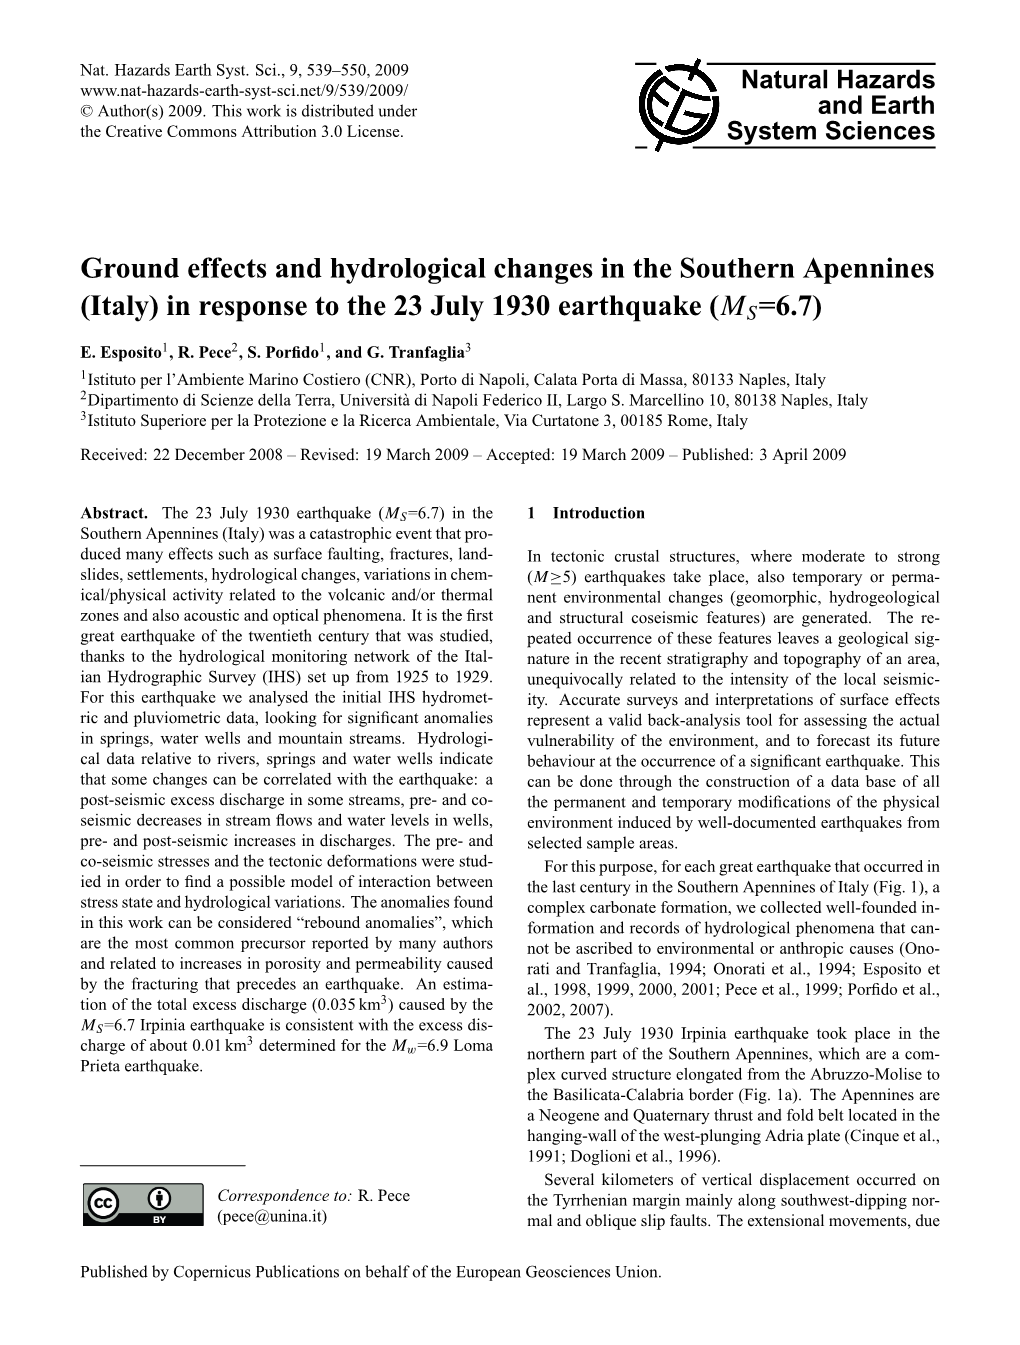 Ground Effects and Hydrological Changes in the Southern Apennines (Italy) in Response to the 23 July 1930 Earthquake (MS=6.7)